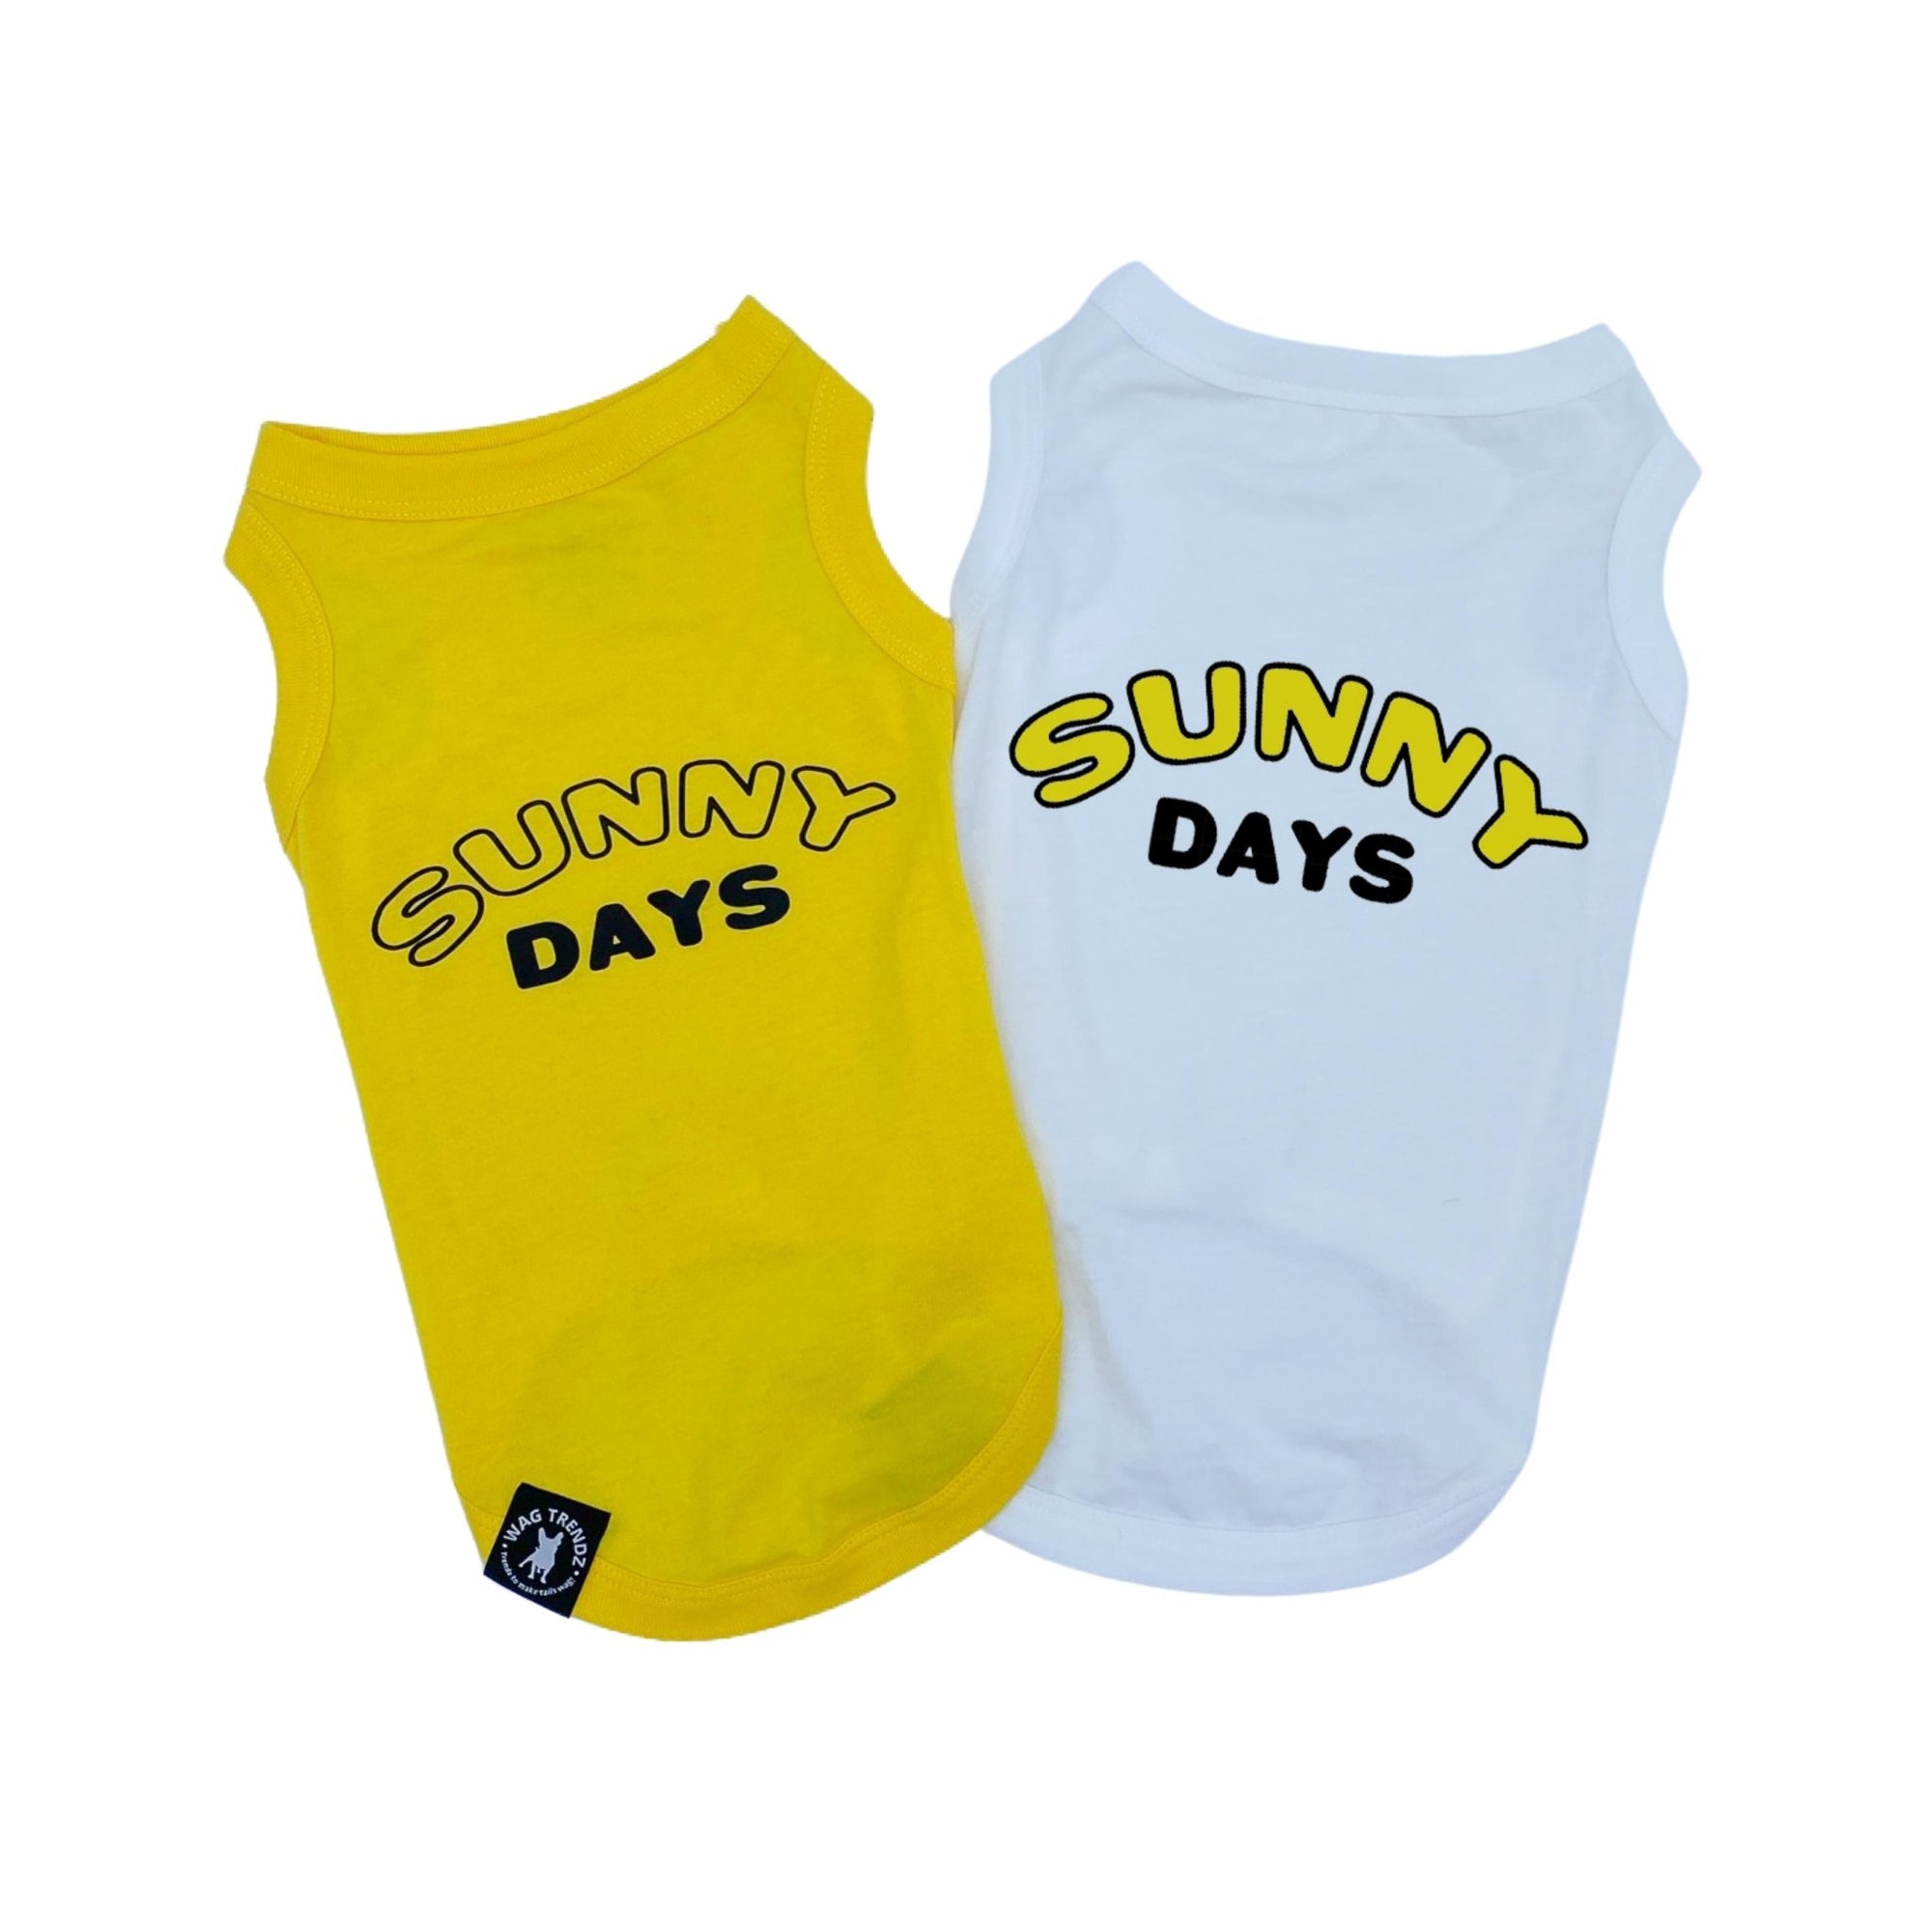 Dog T-Shirt - &quot;Sunny Days&quot; dog t-shirts in Yellow and White - backside says Sunny Days with lettering in yellow and black - against solid white background - Wag Trendz